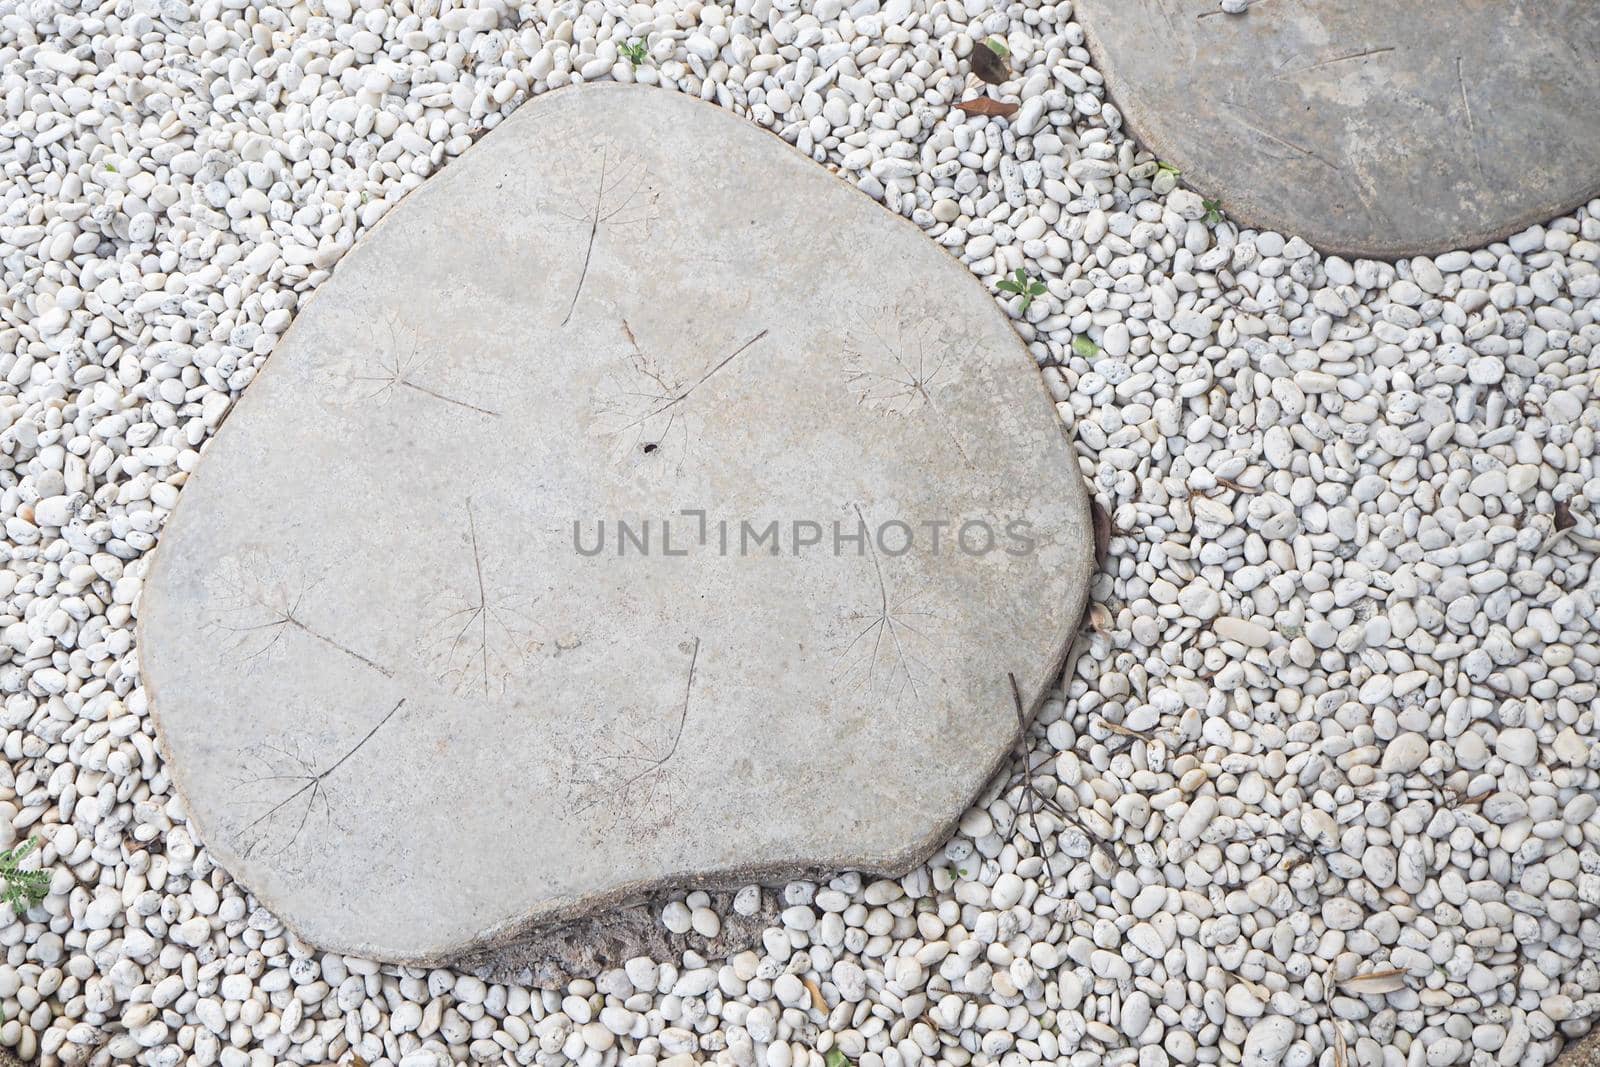 GARDEN STONE PATH. Dry leaf texture on white stone for footpath in rock garden hardscape.